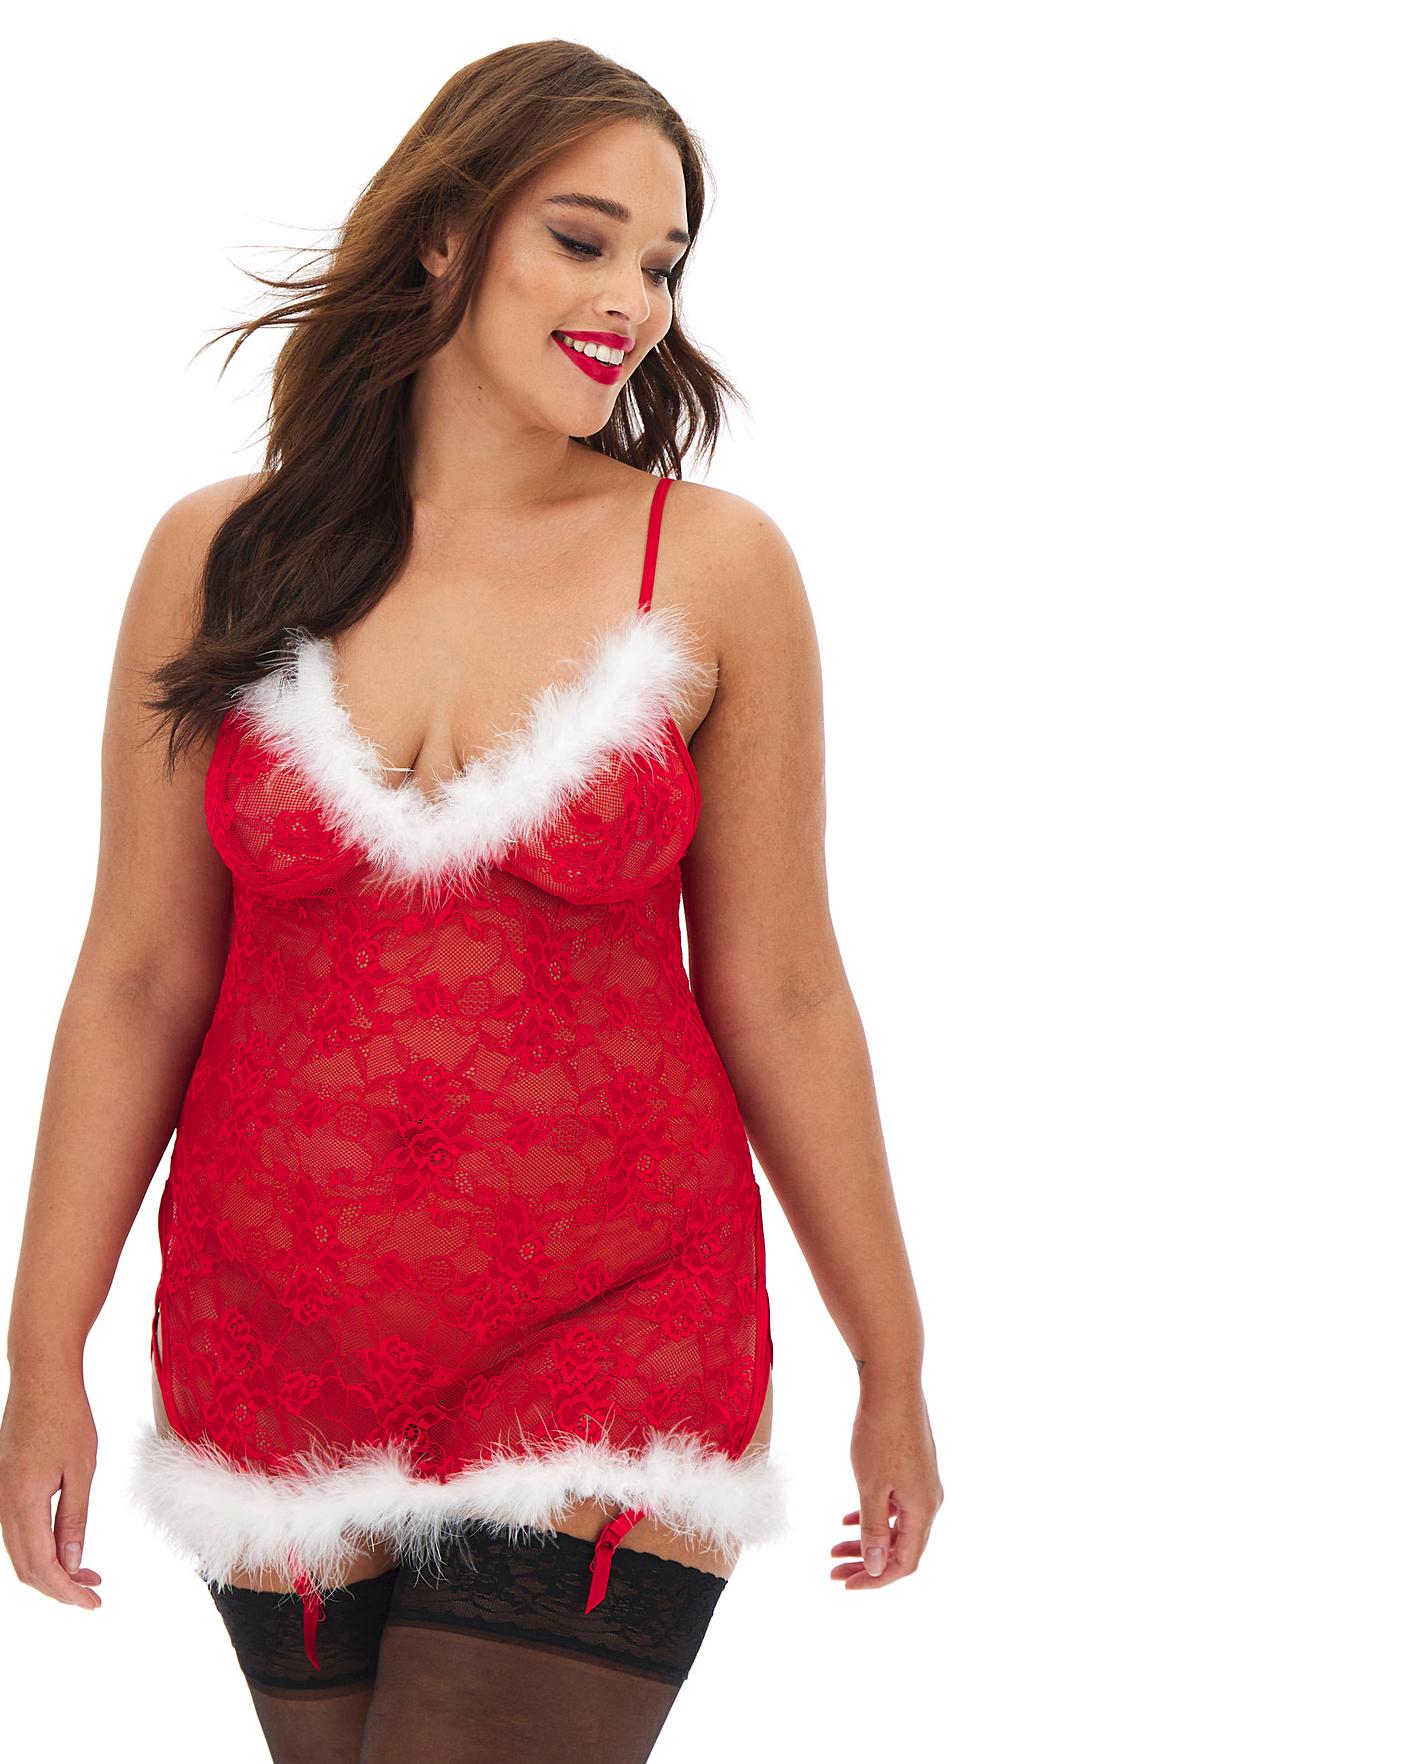 mrs claus outfit ann summers